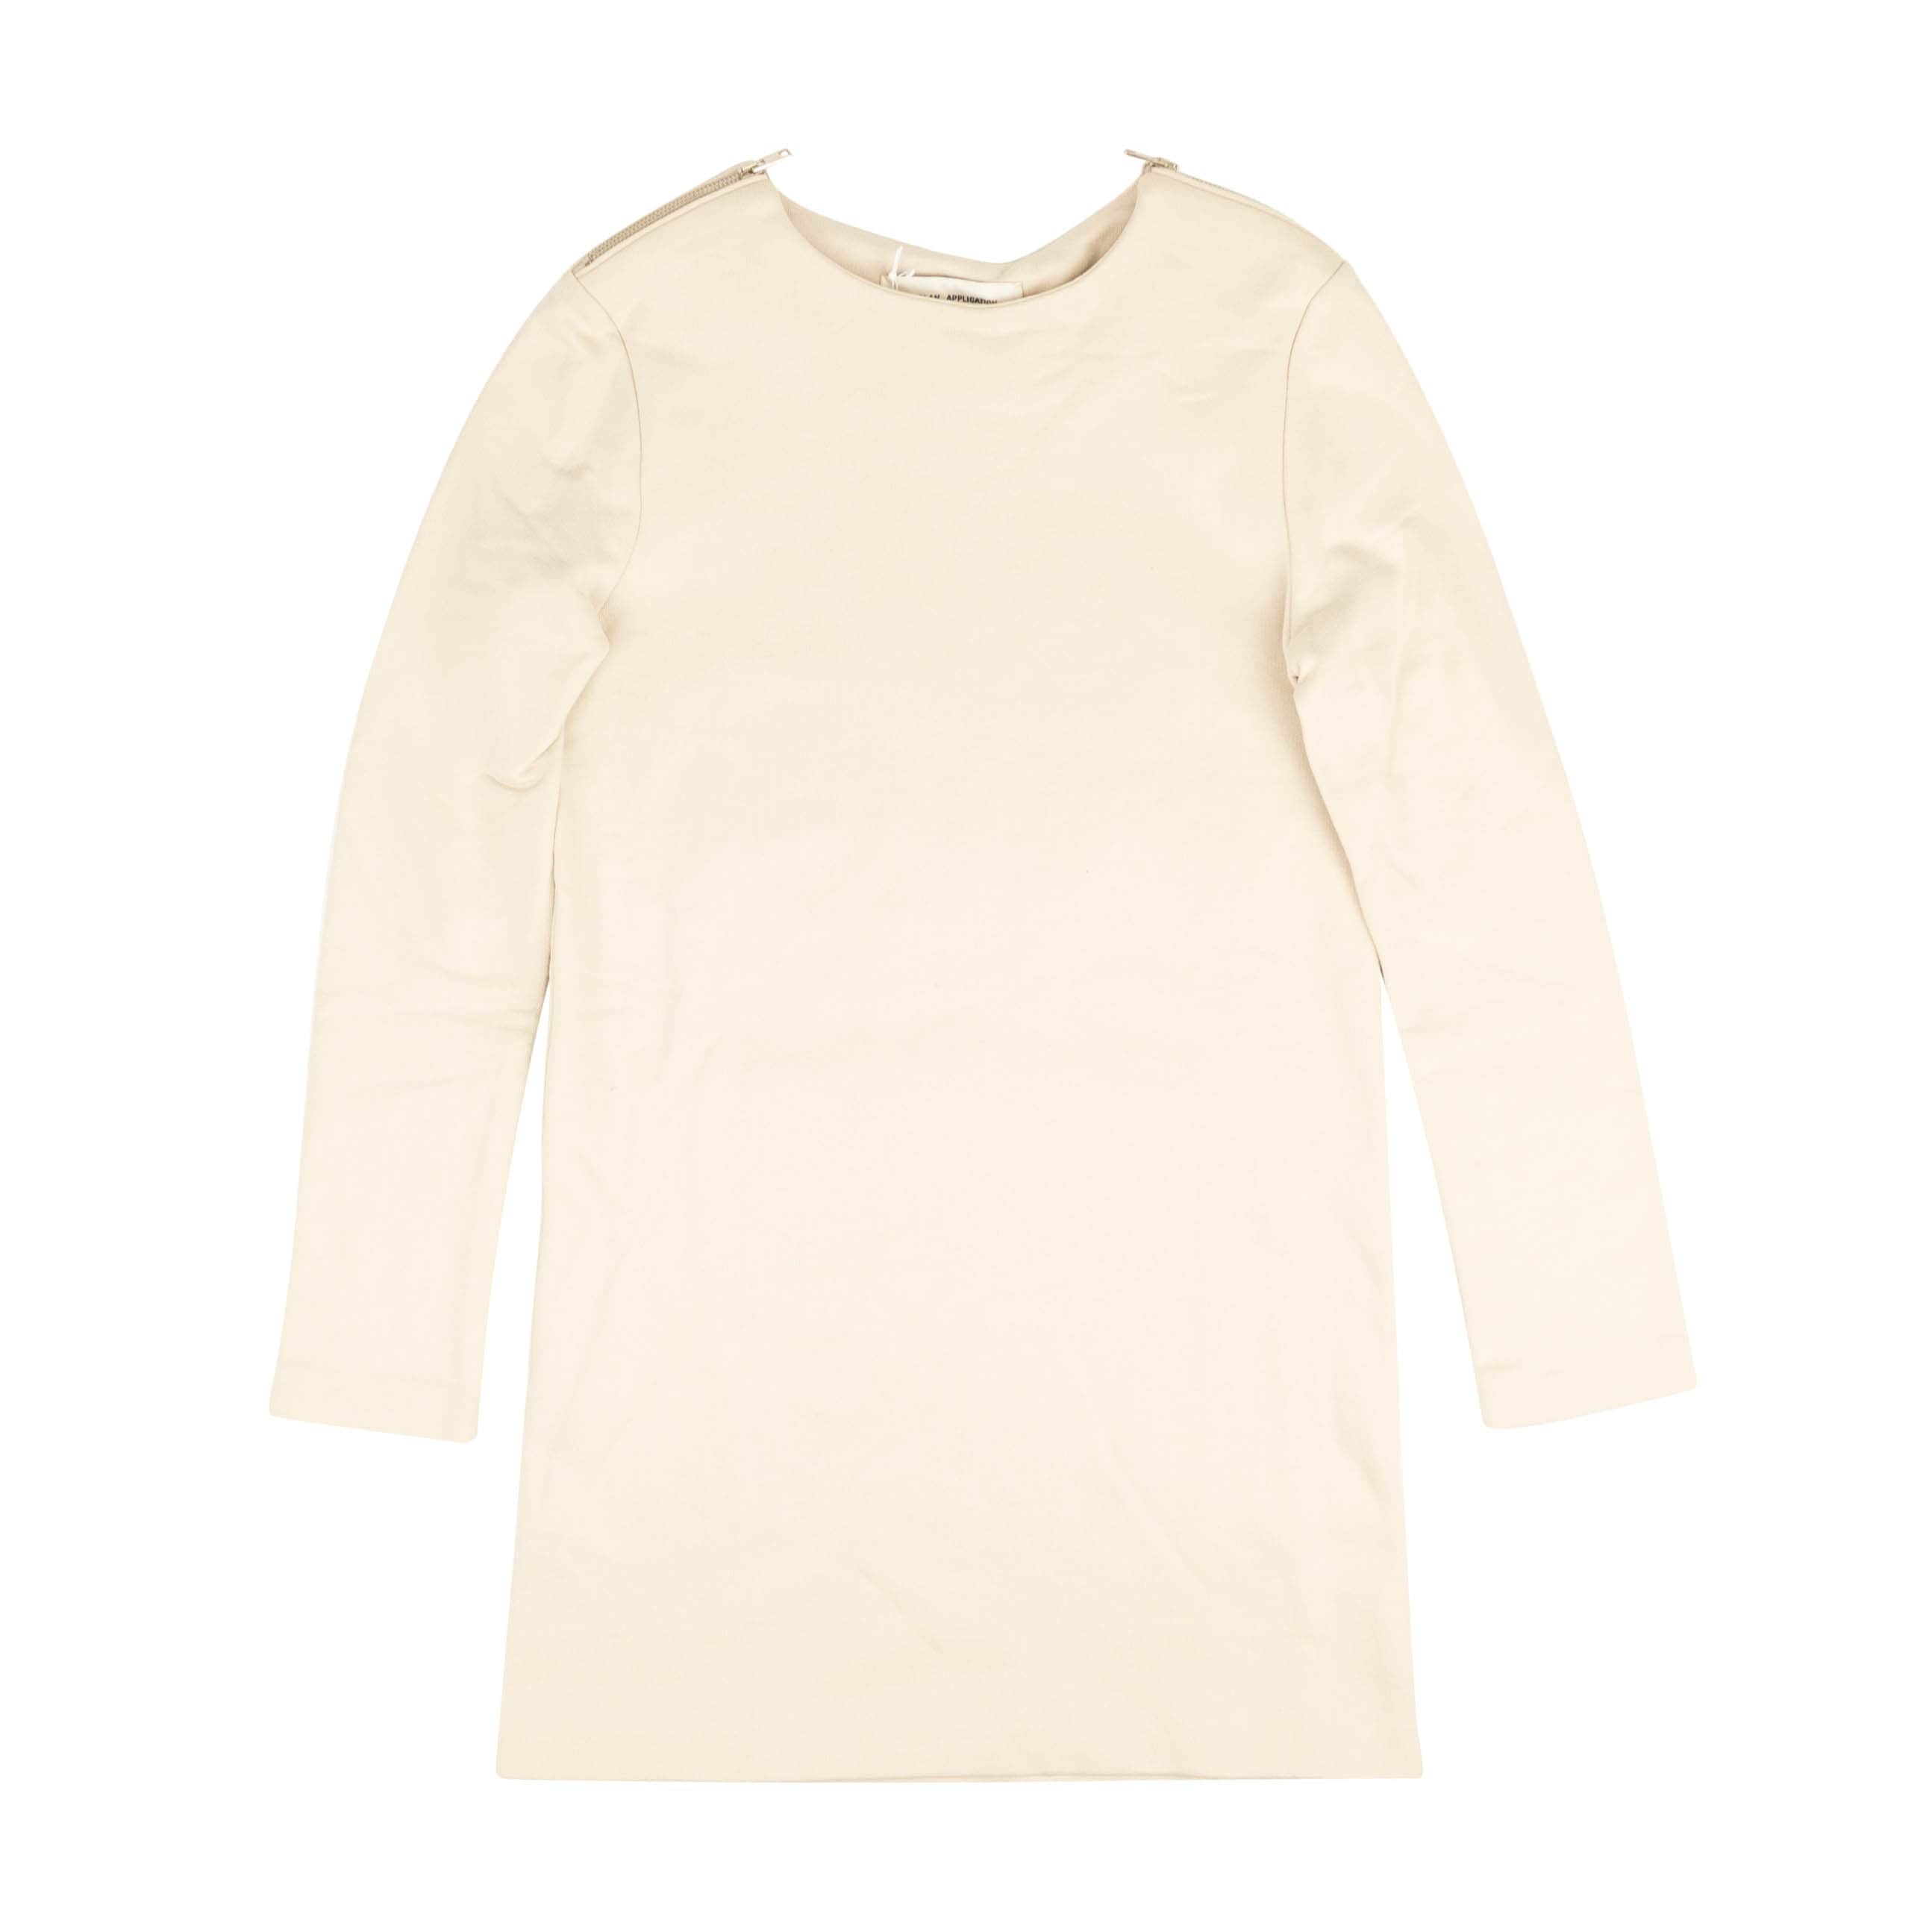 A_Plan_Application a_plan_application, channelenable-all, chicmi, couponcollection, gender-womens, main-clothing, size-s, under-250, womens-day-dresses S Beige Cotton Sweatshirt Dress 74NGG-AP-14/S 74NGG-AP-14/S